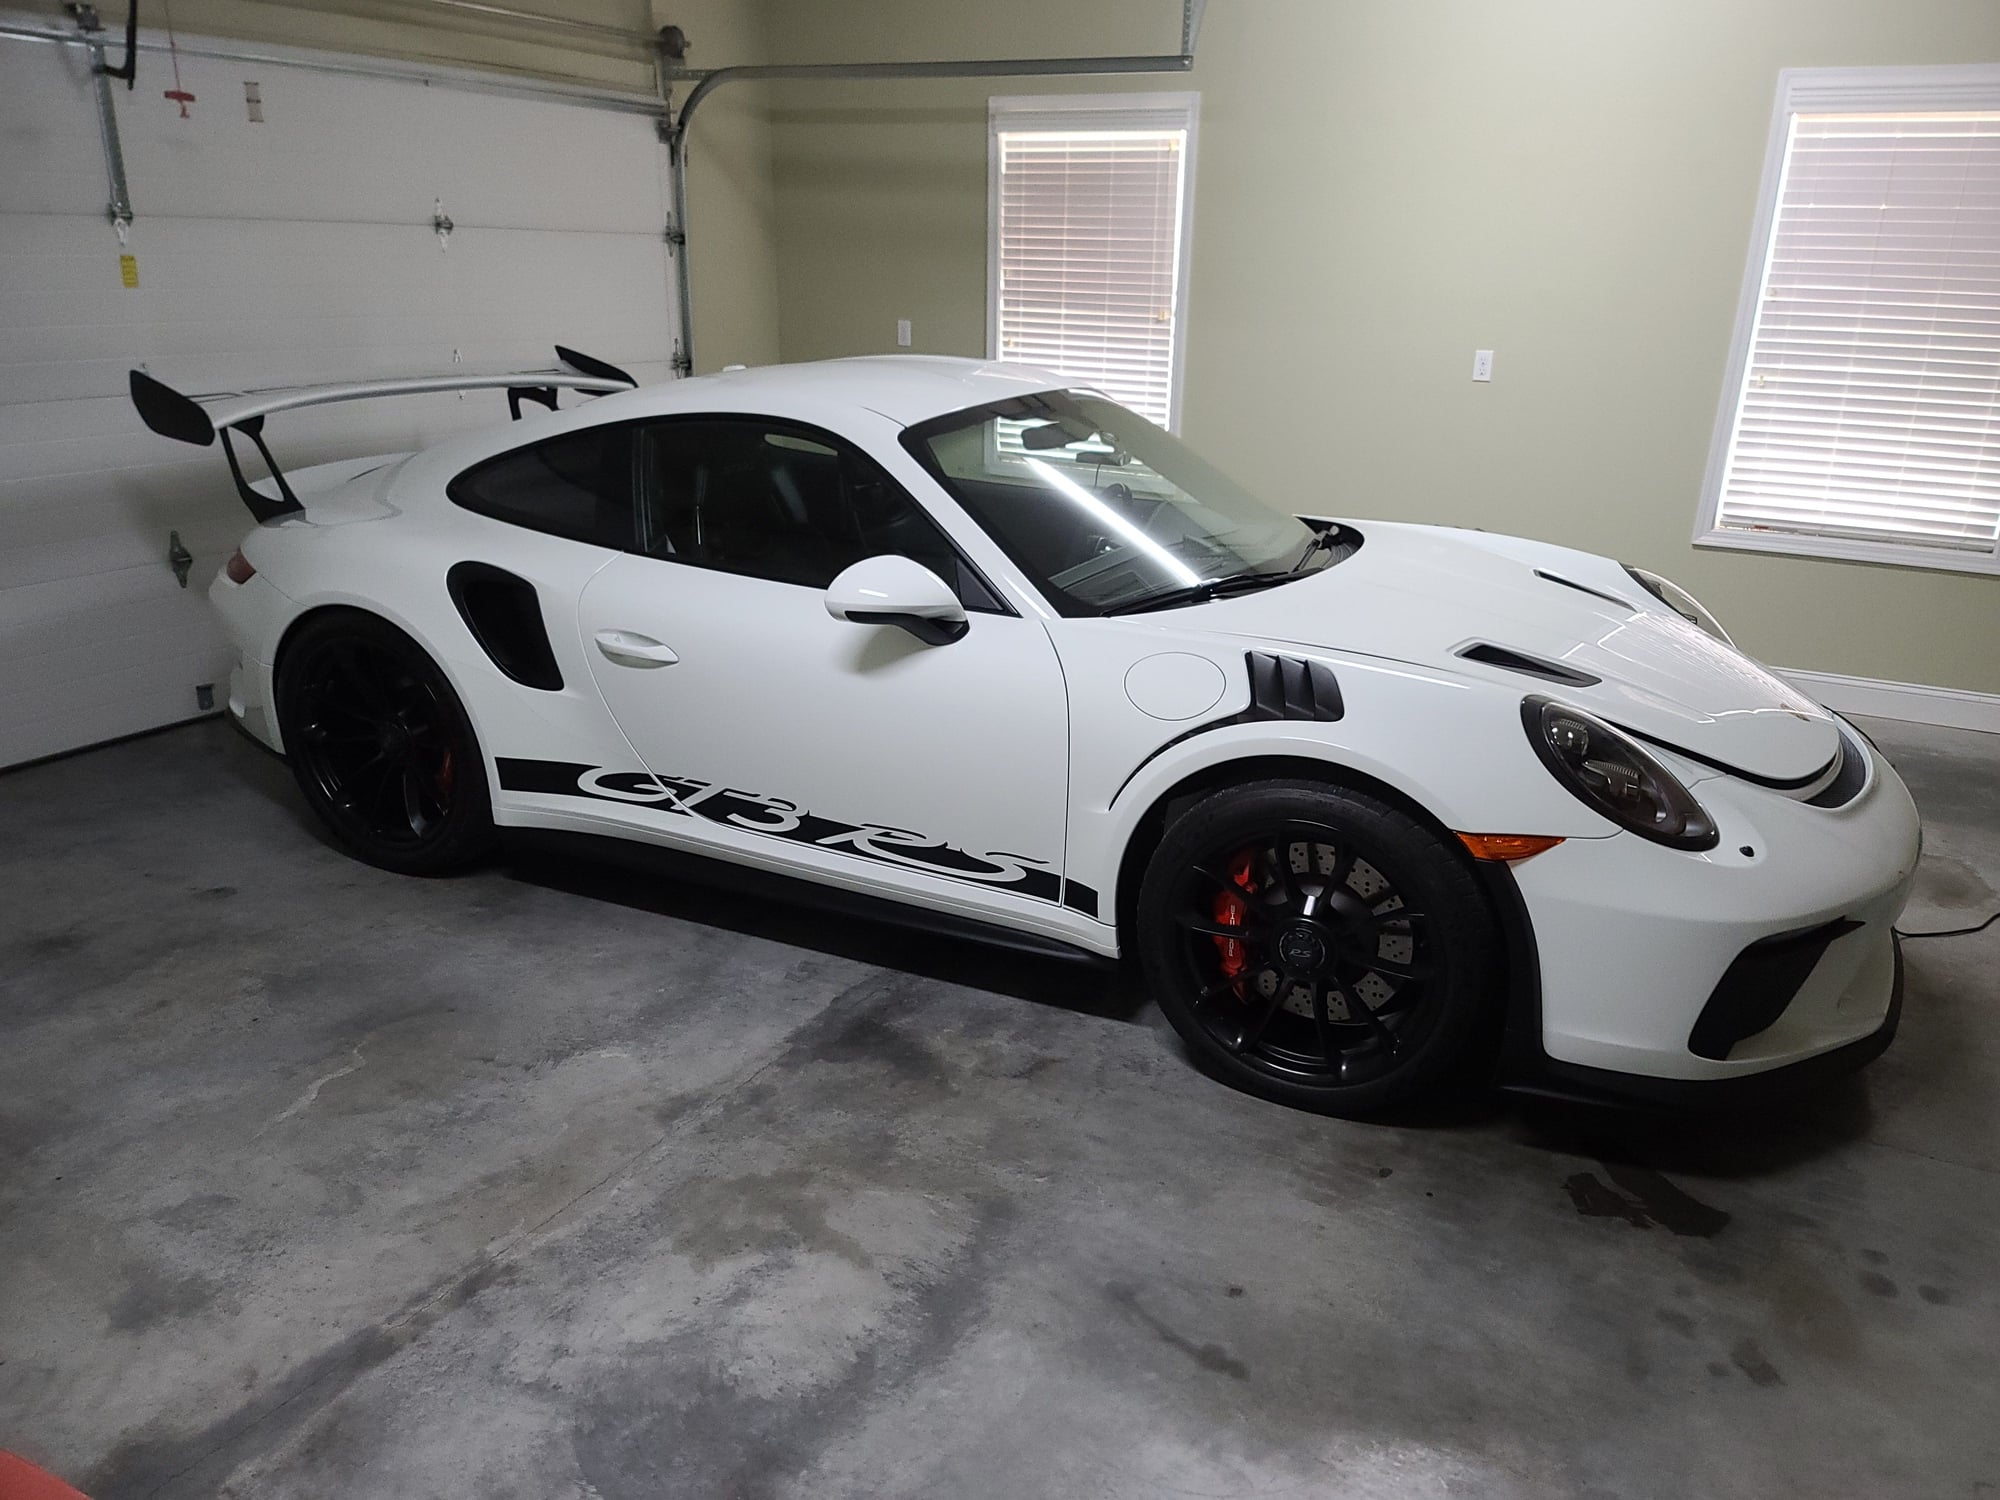 2019 Porsche GT3 - 2019 Porsche GT3RS with 15k aftermarket add ons... - Used - VIN WPOAF2A91KS164716 - 4,361 Miles - 6 cyl - 2WD - Automatic - Coupe - White - Knoxville, TN 37849, United States